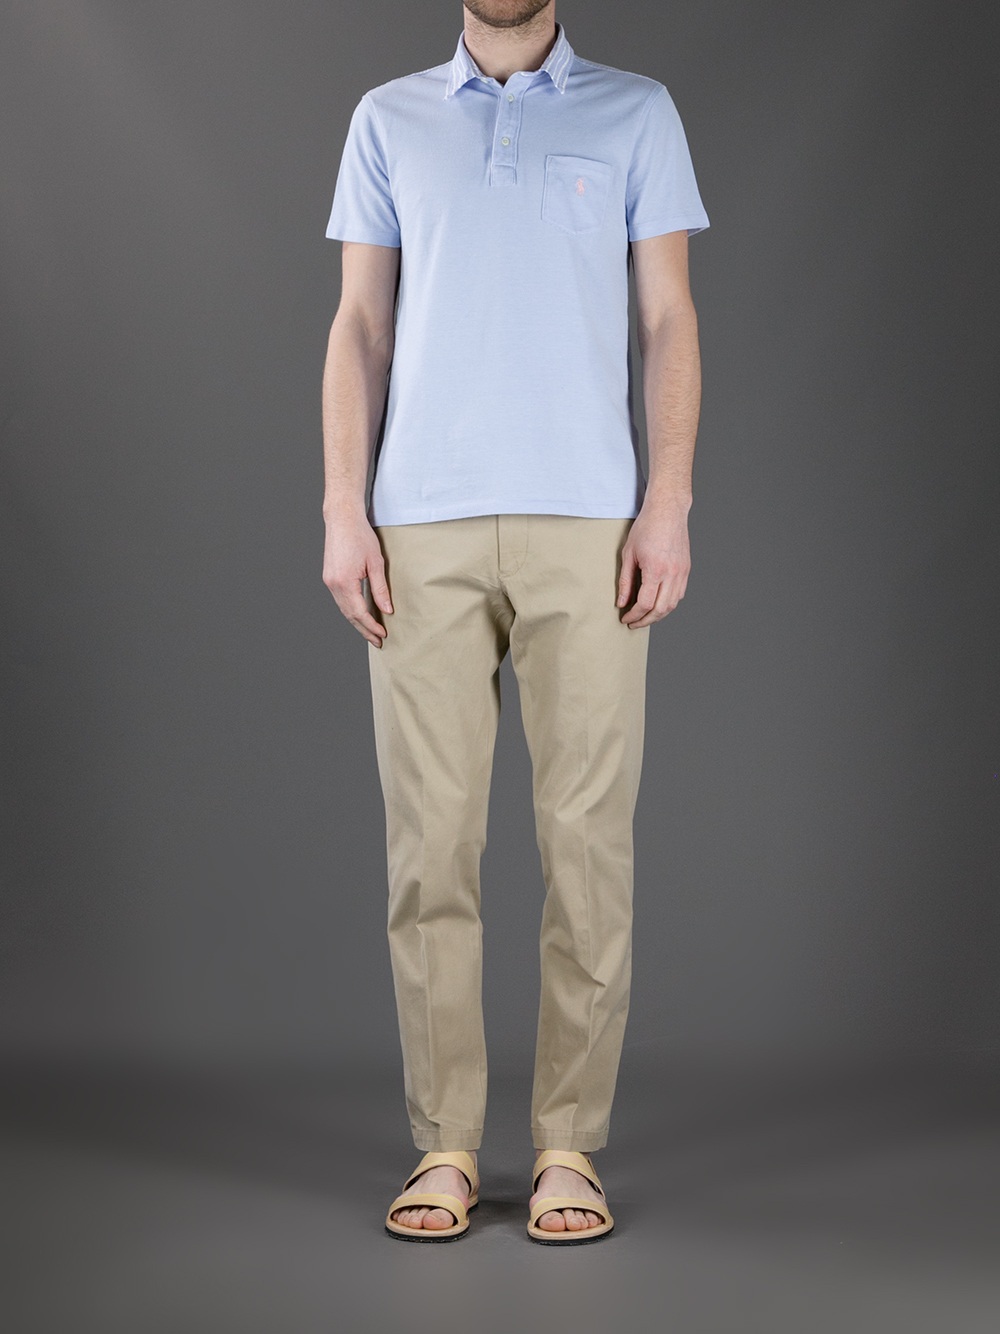 Polo Ralph Lauren Custom Fit Chino Trouser in Natural for Men - Lyst